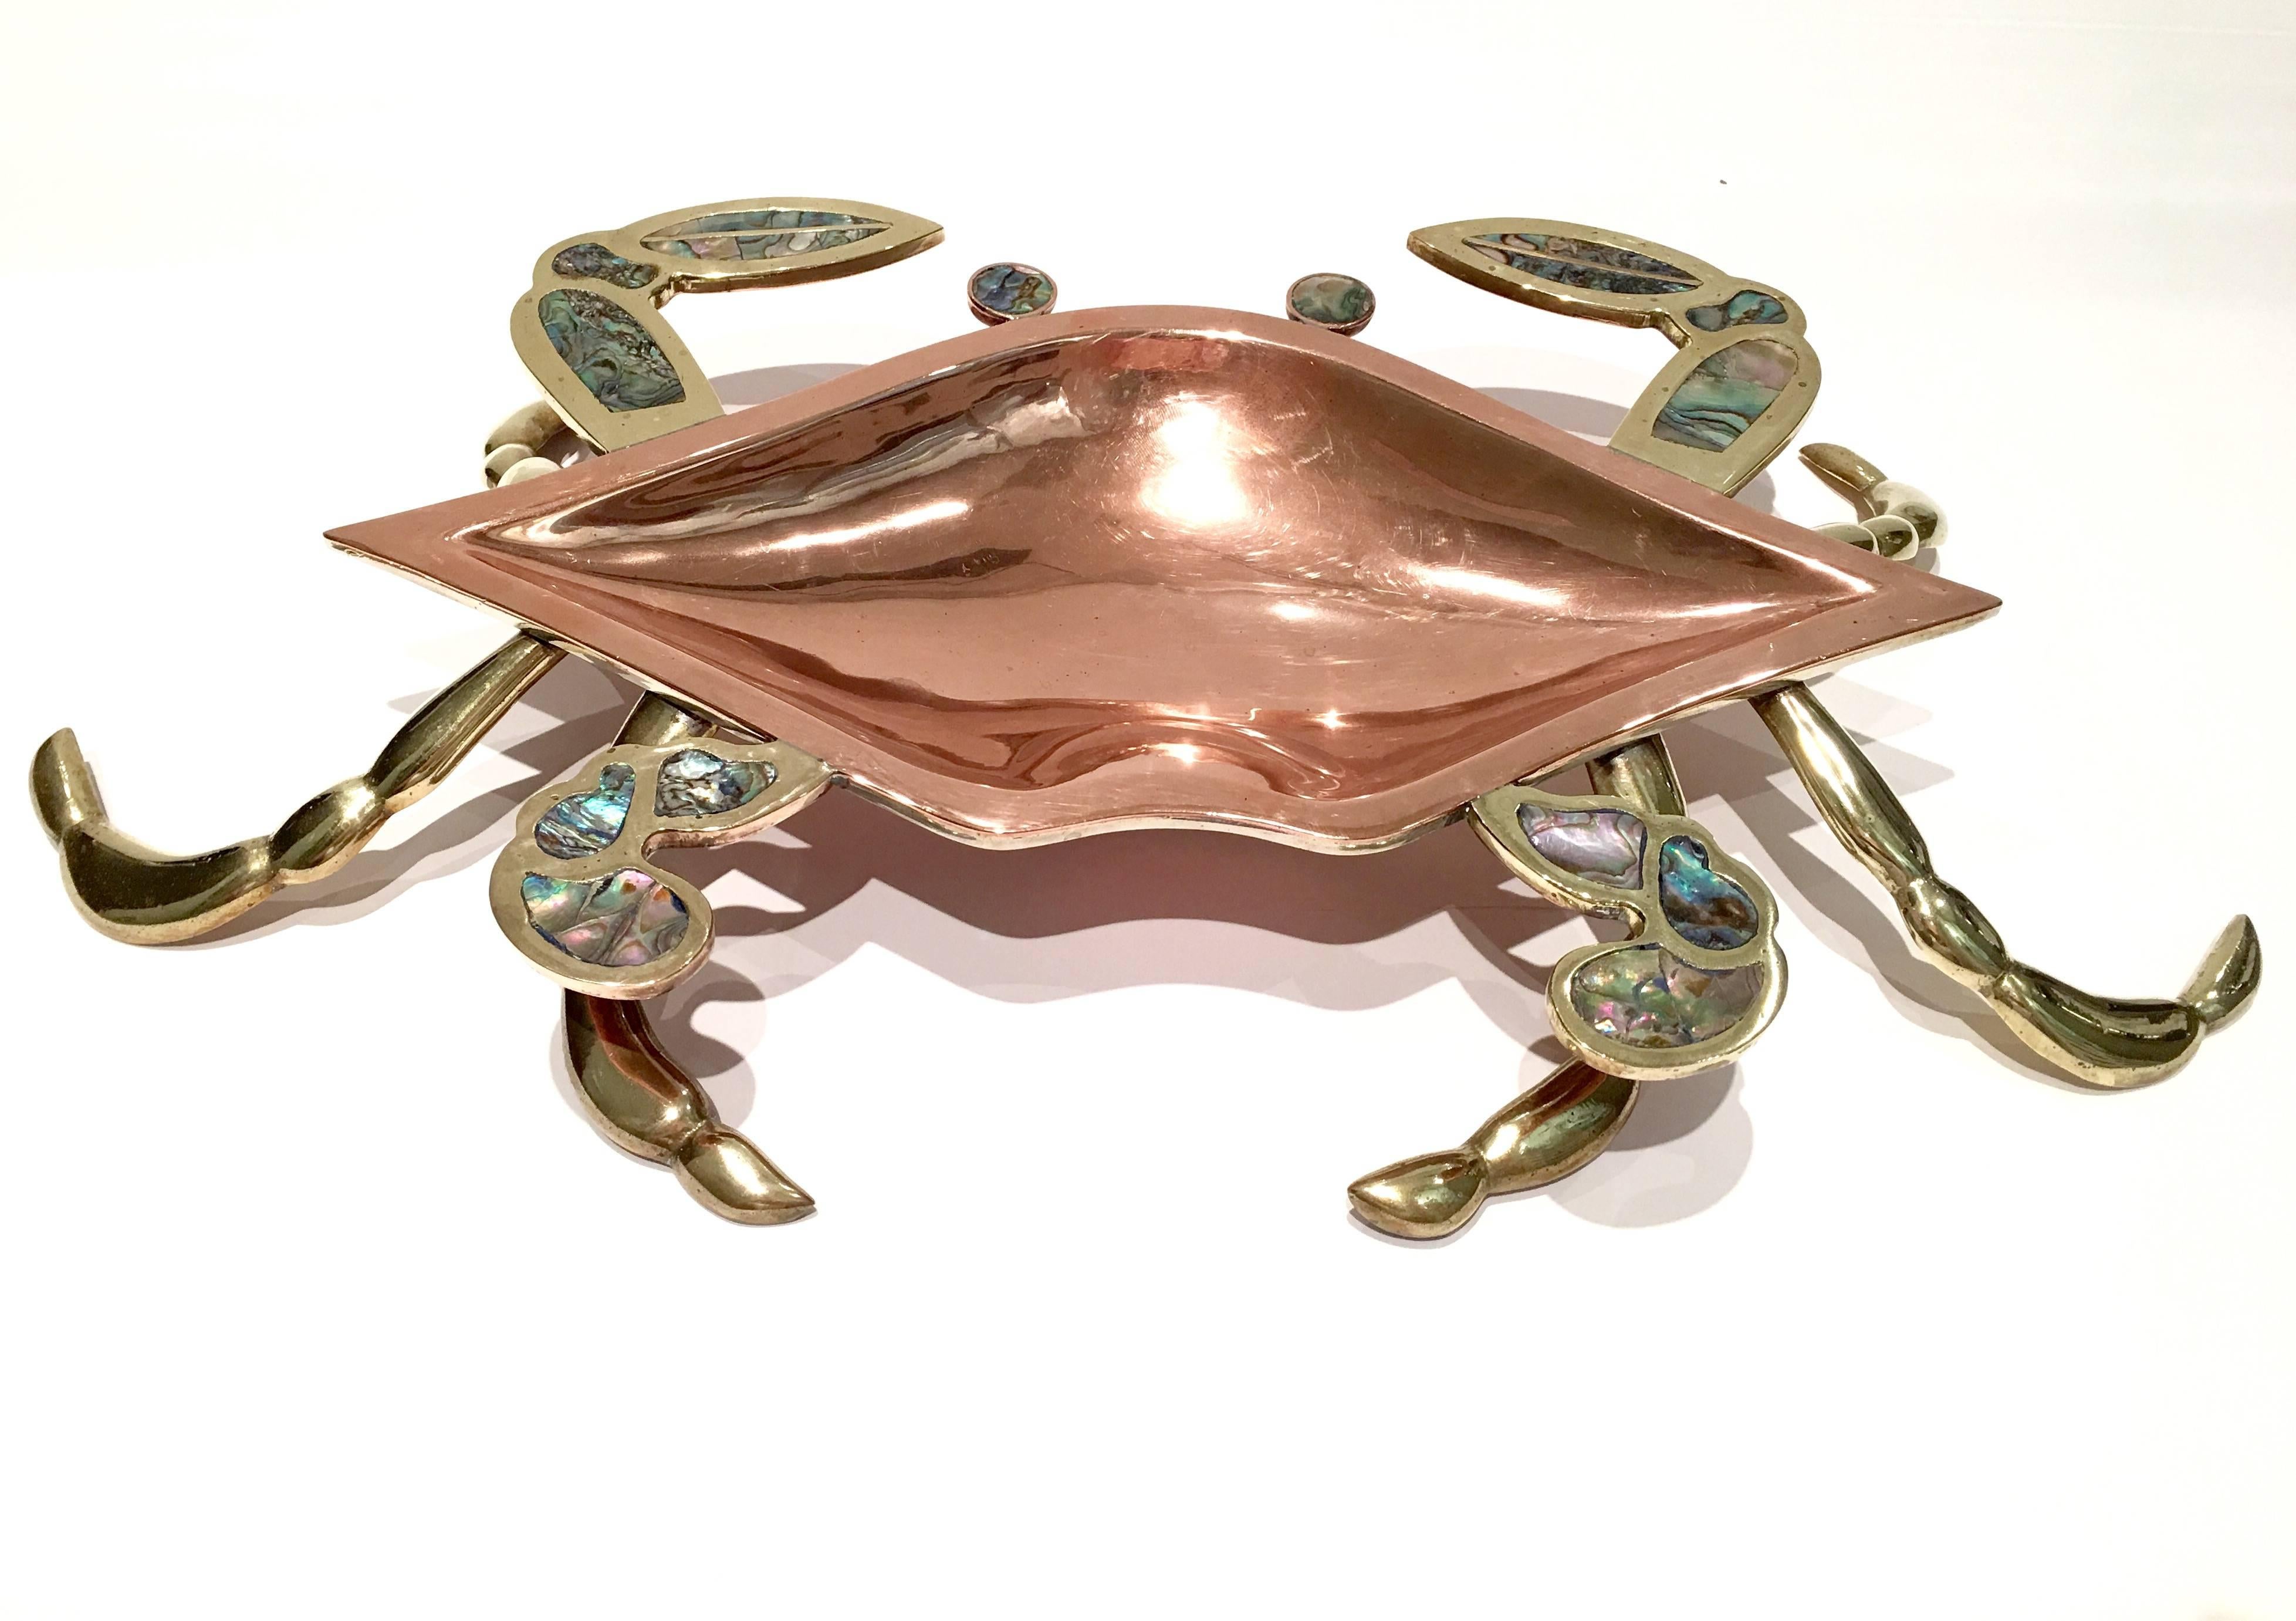 Incredibly preserved large copper, brass and abalone inlay crab serving bowl/tray and sculpture. Signed, F.C.S P MEXICO COBRE on the underside. The brass legs act as a stand. Pristine condition.